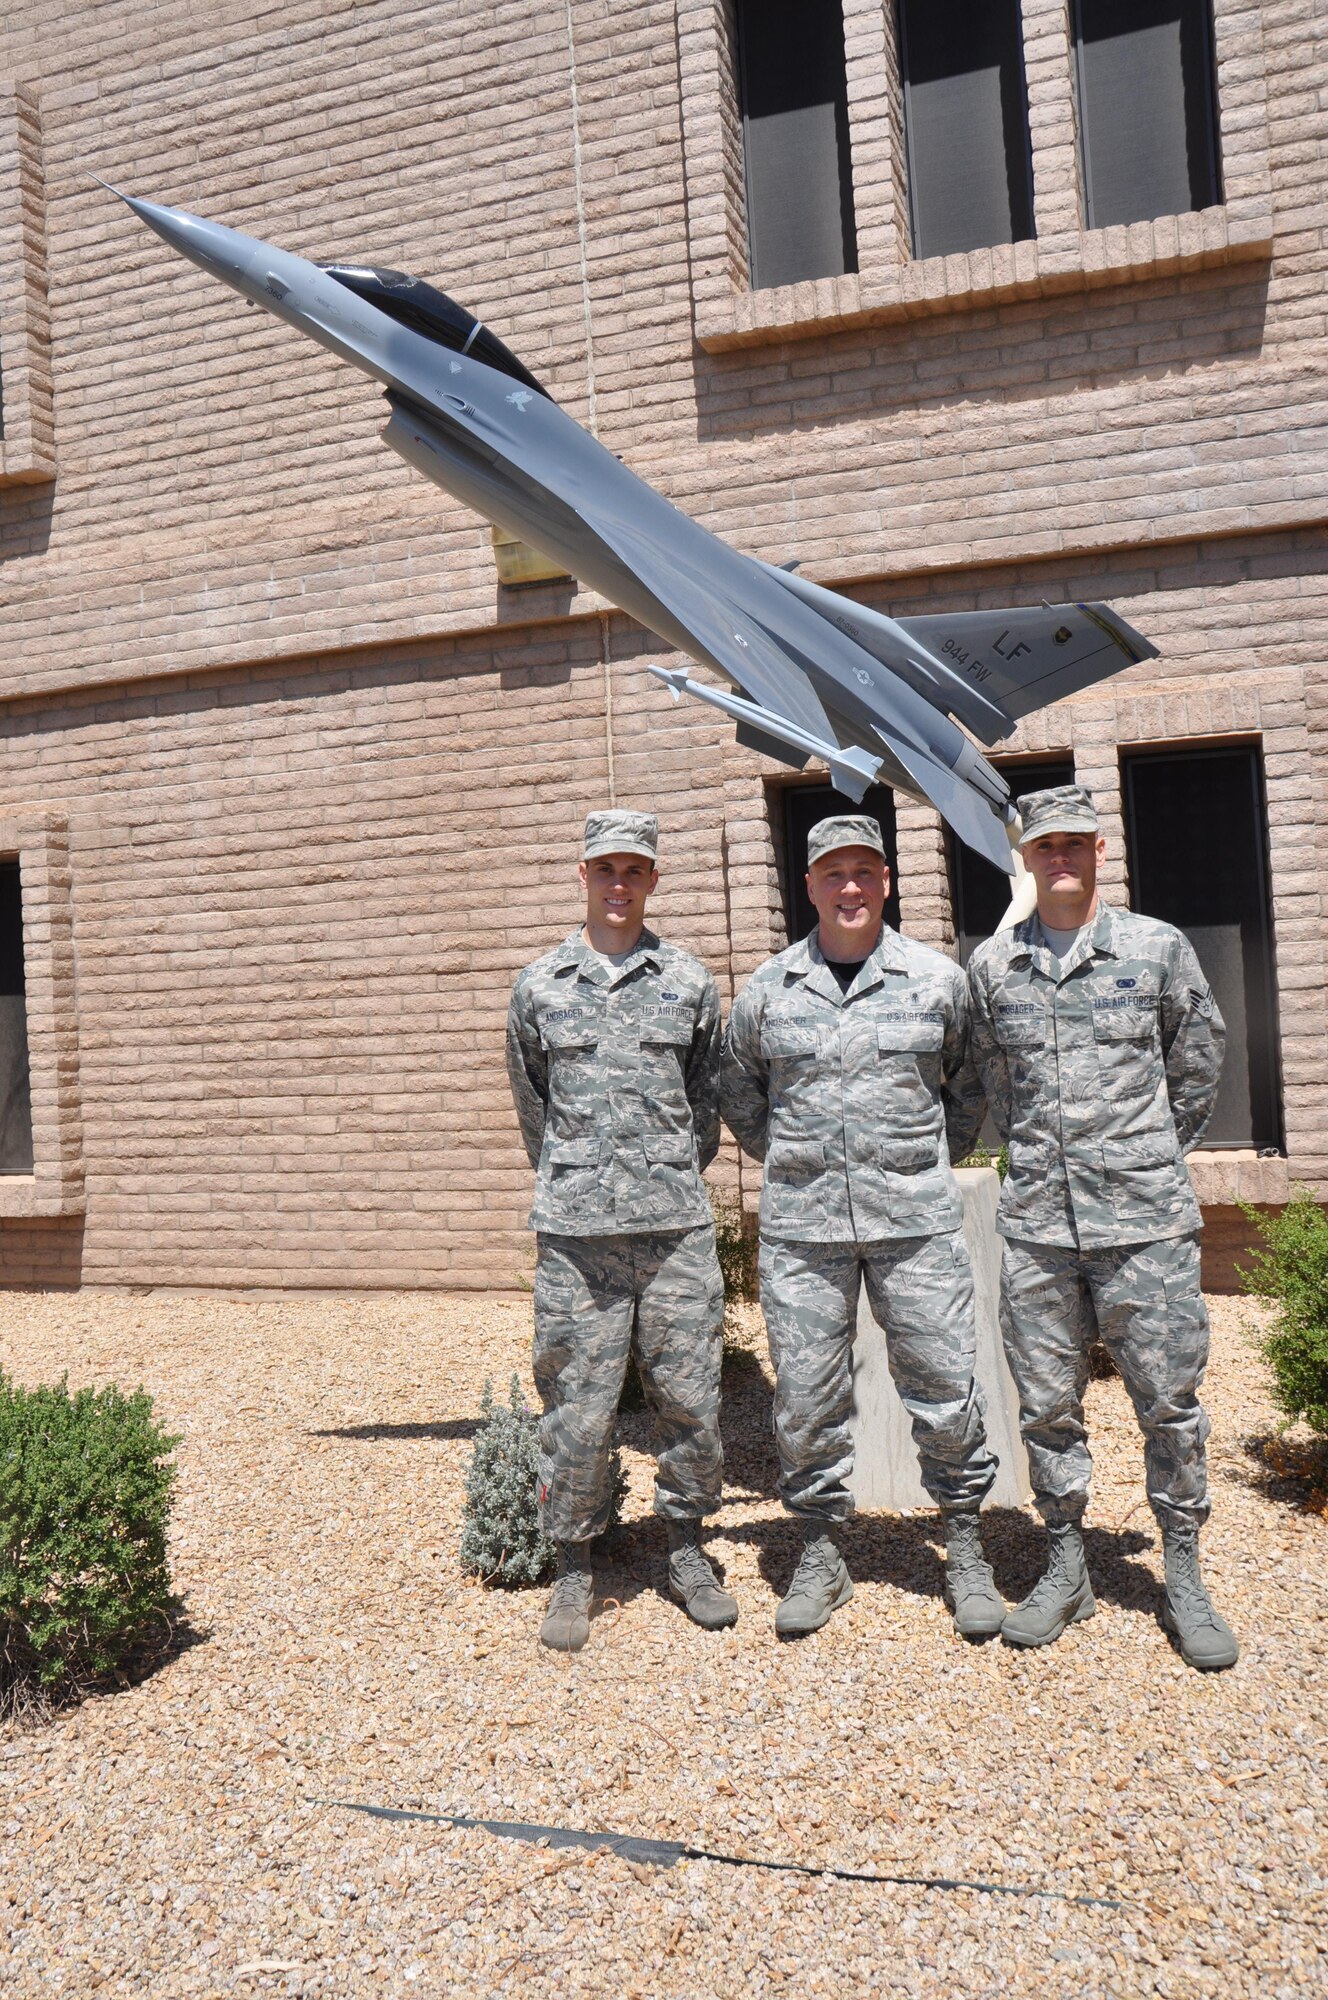 With a combined service of over 35 years Master Sgt. Darin Andsager, 944th Medical Squadron First Sergeant and his two sons Senior Airmen Nicholas Andsager, 944th Logistics Readiness Squadron Material Management Helper and Alec Andsager, 944th Force Support Squadron Food Specialist are honored, as a family, to serve the nation.